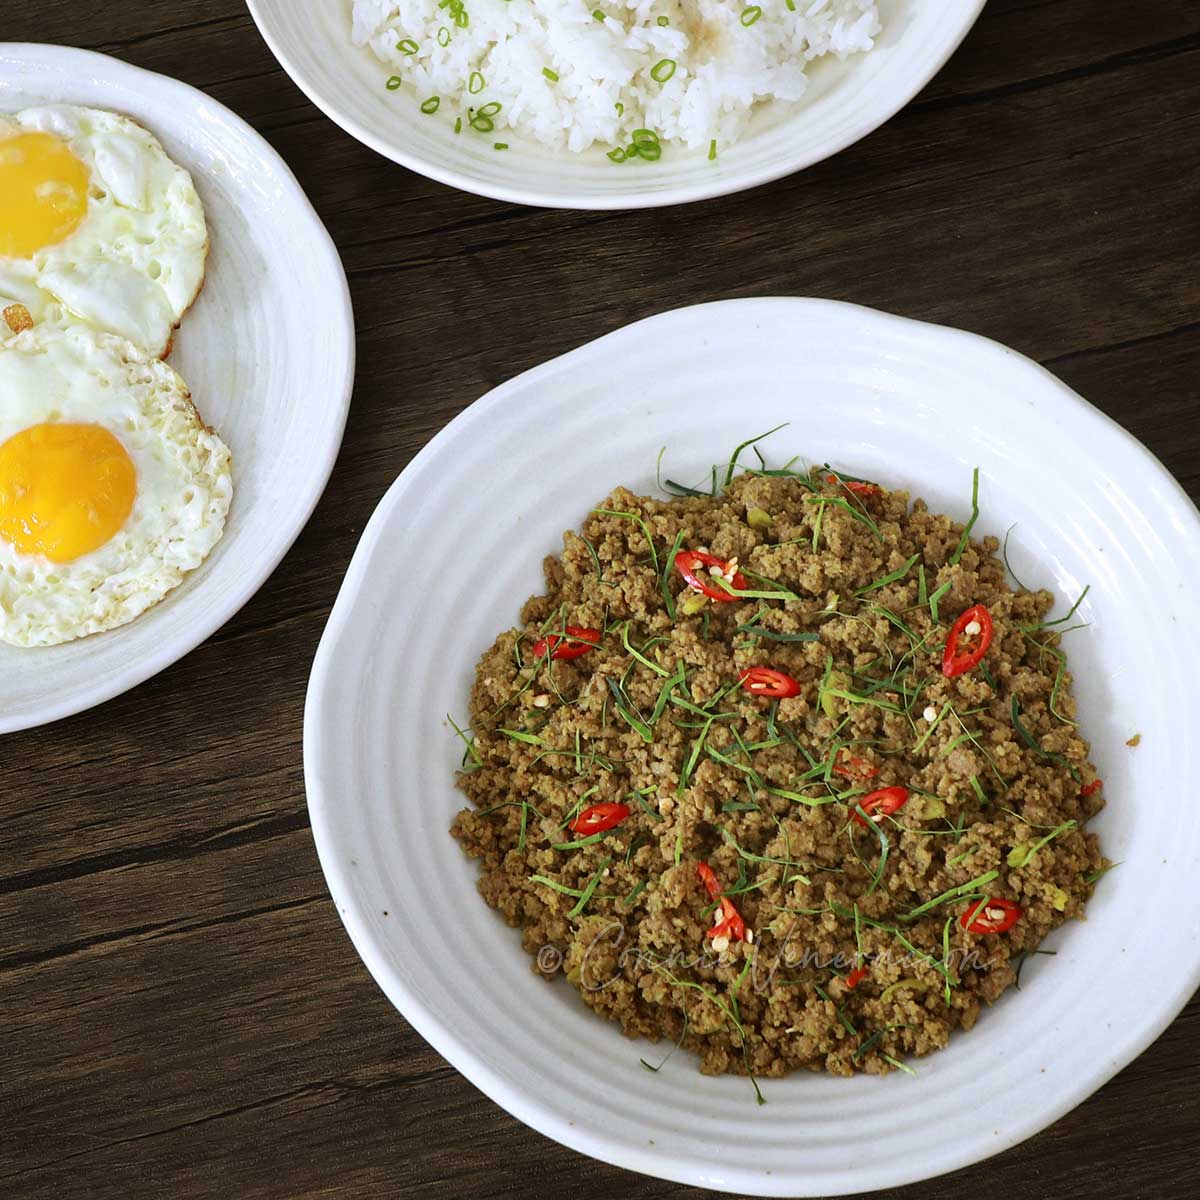 Thai-style dry curry with fried eggs and rice on the side